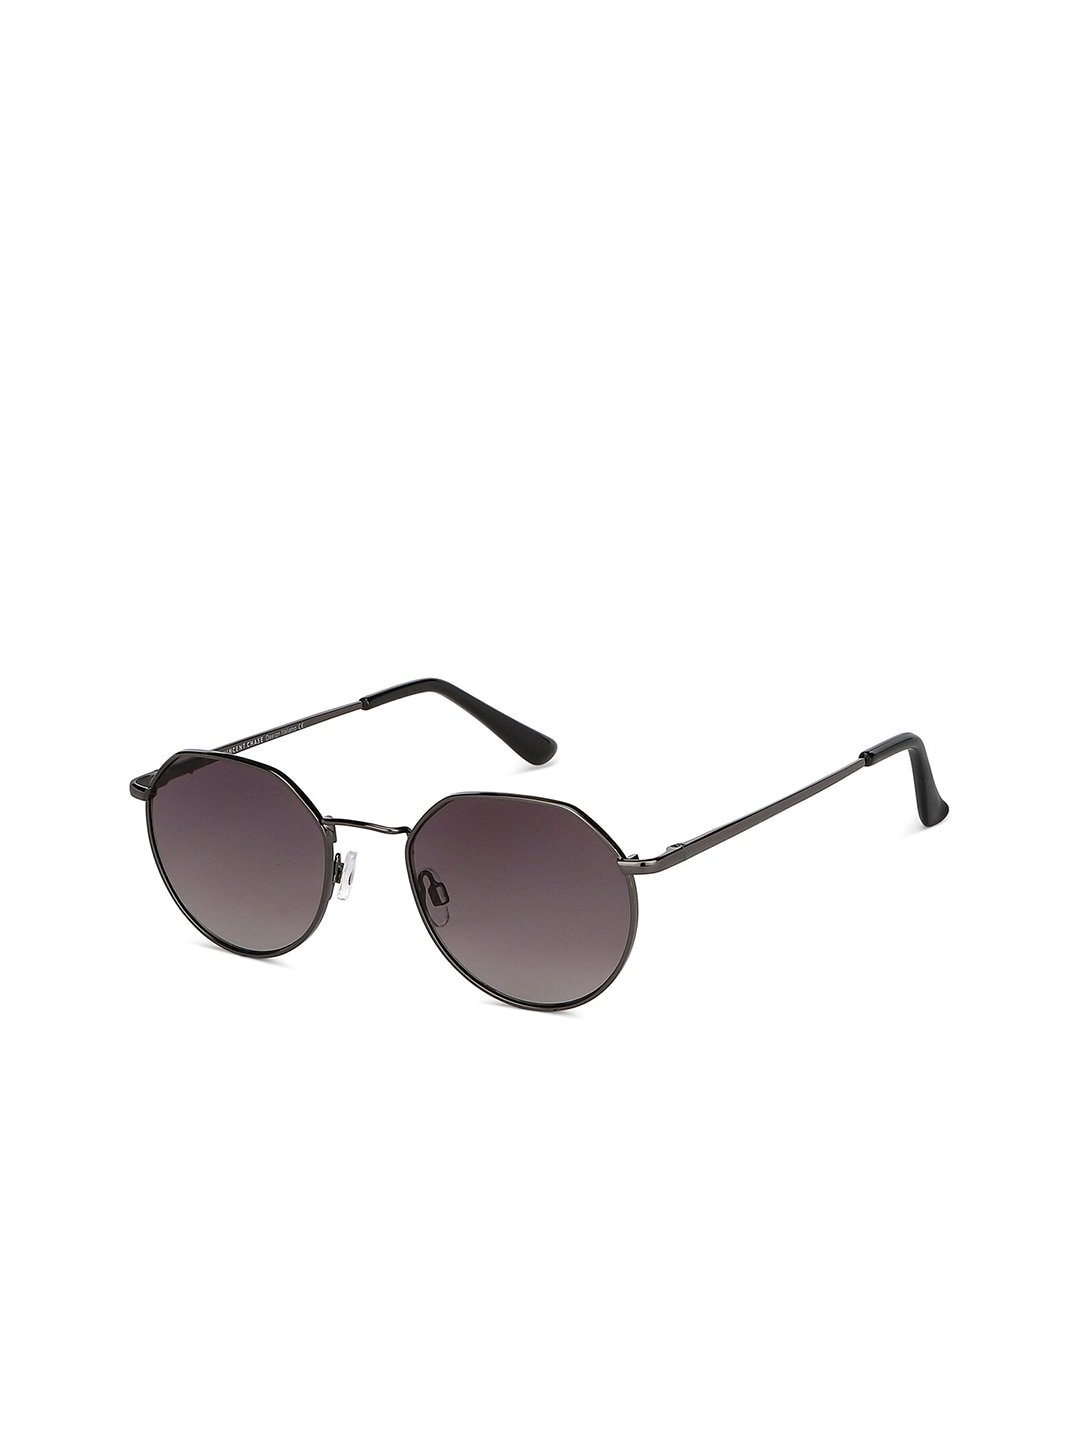 Vincent Chase Unisex Grey Lens & Gunmetal-Toned Other Sunglasses with UV Protected Lens